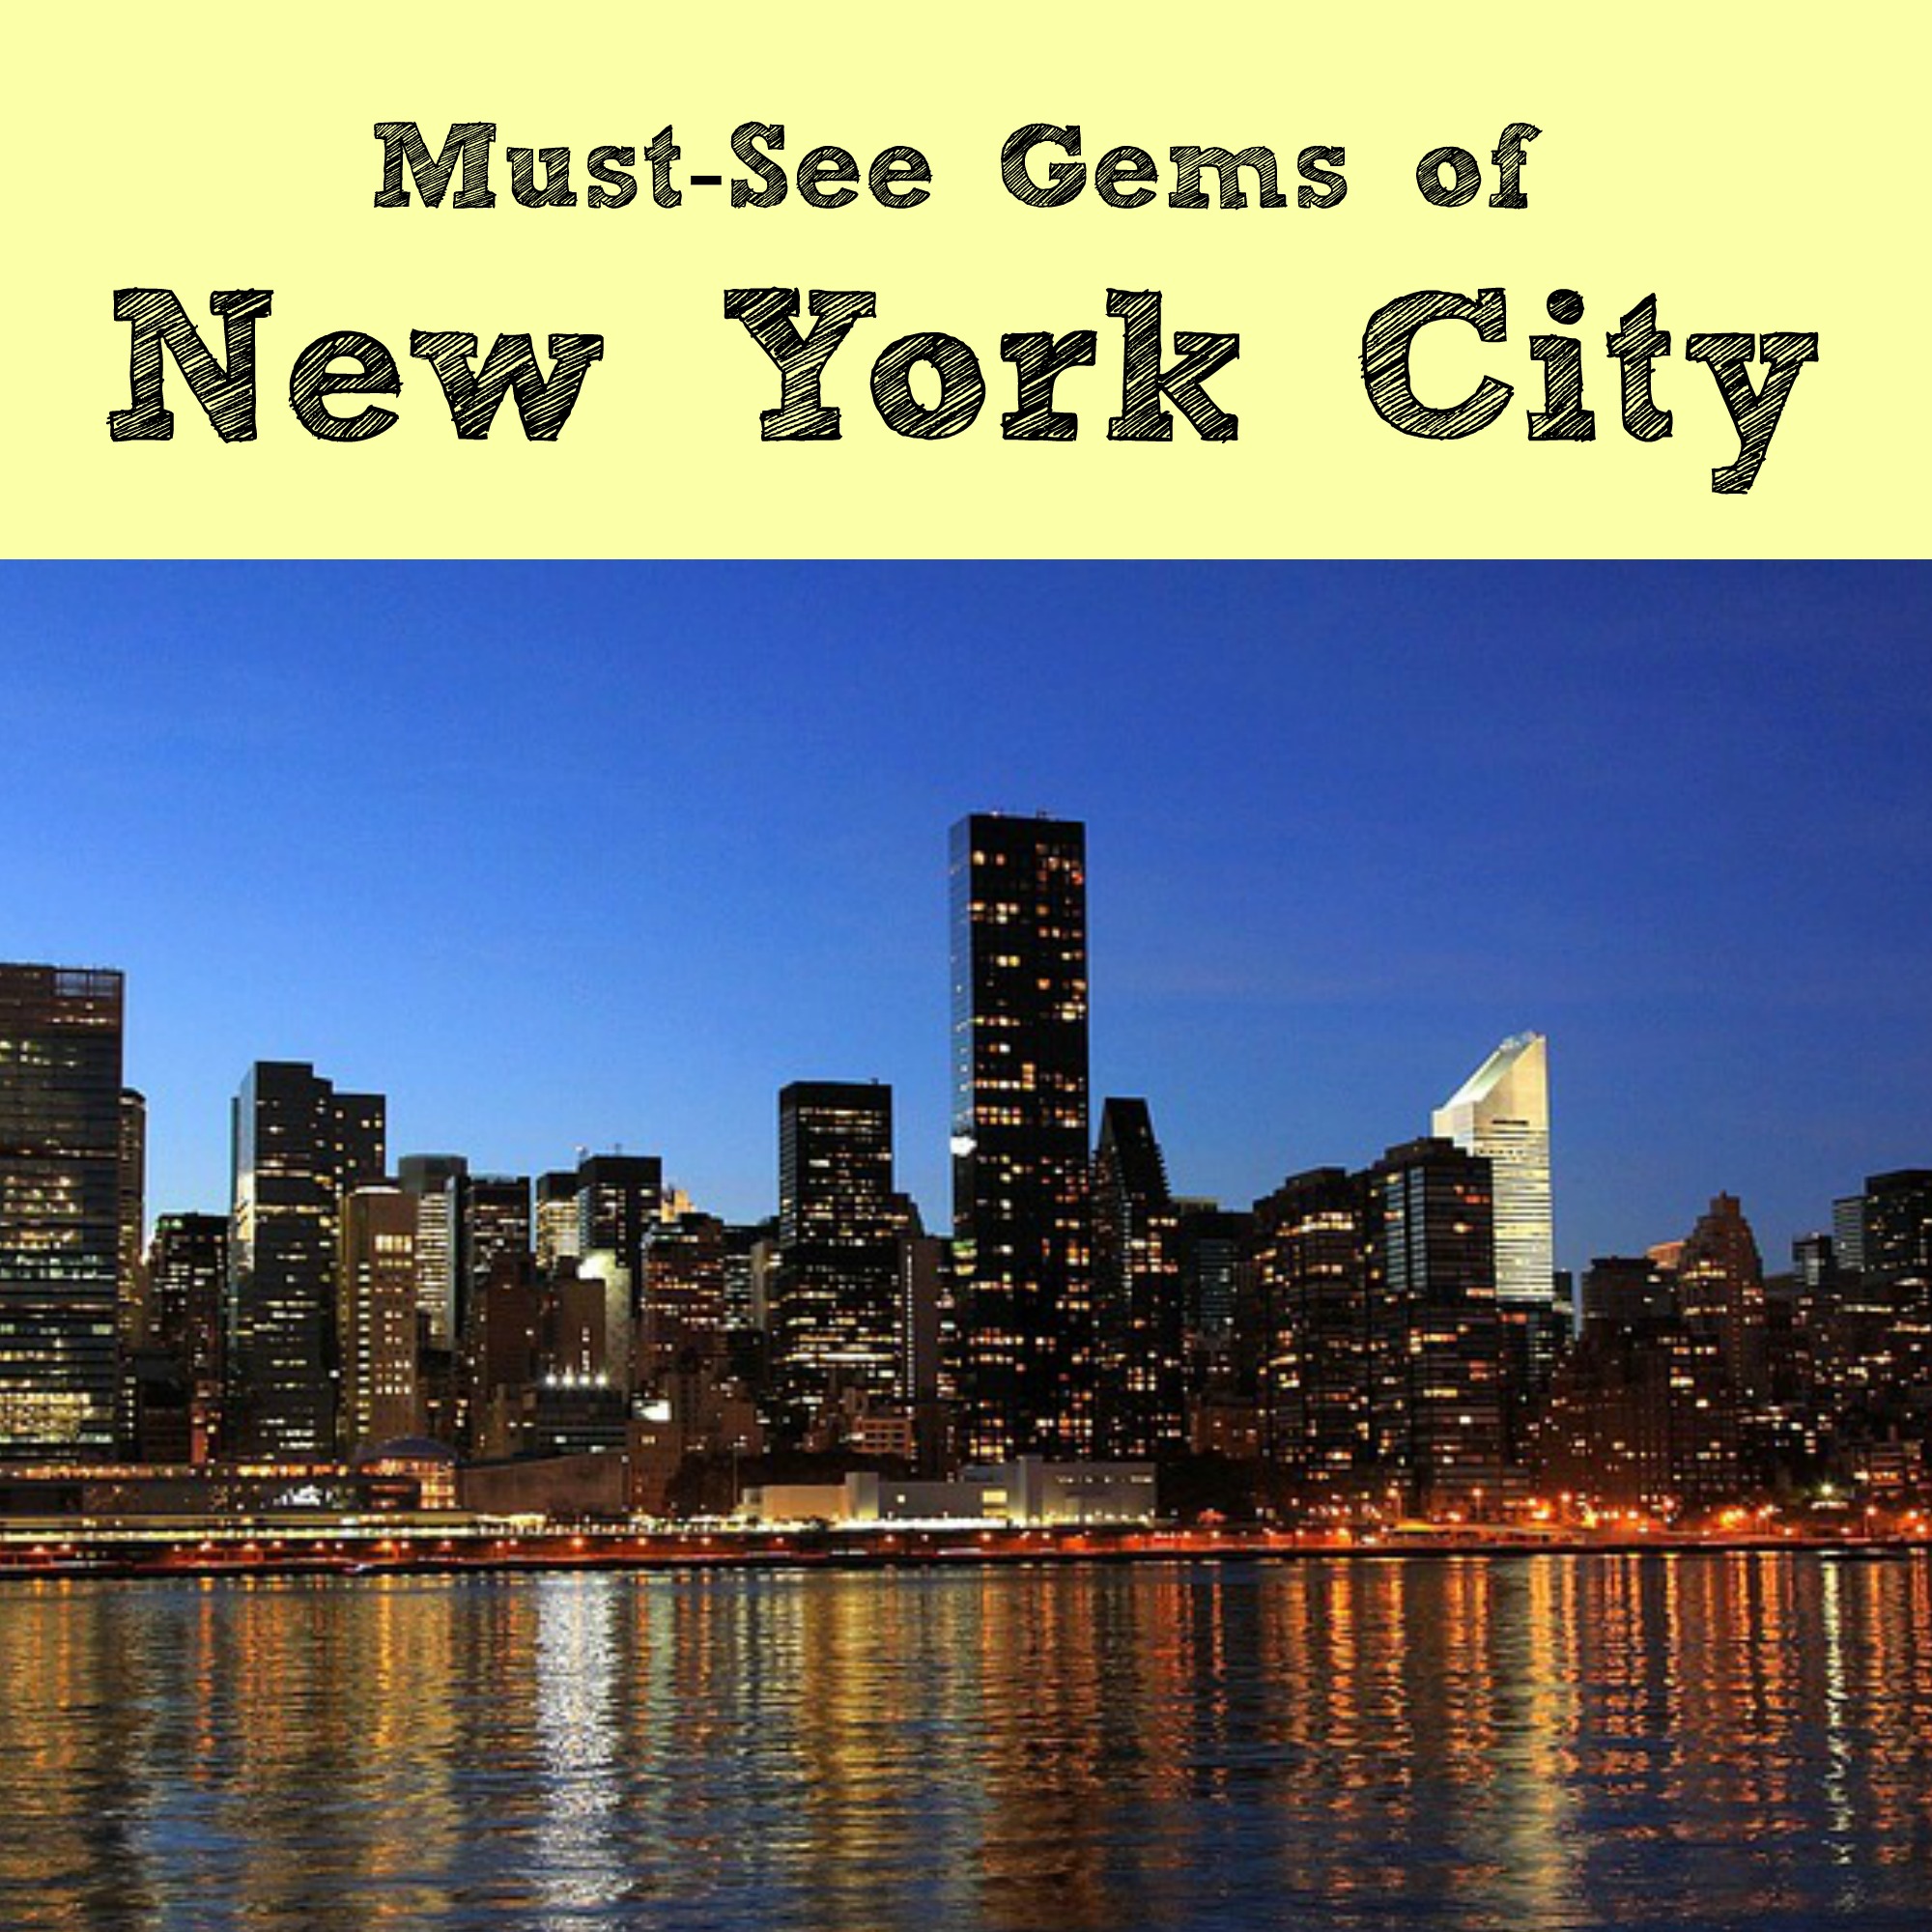 Must See Gems of New York City